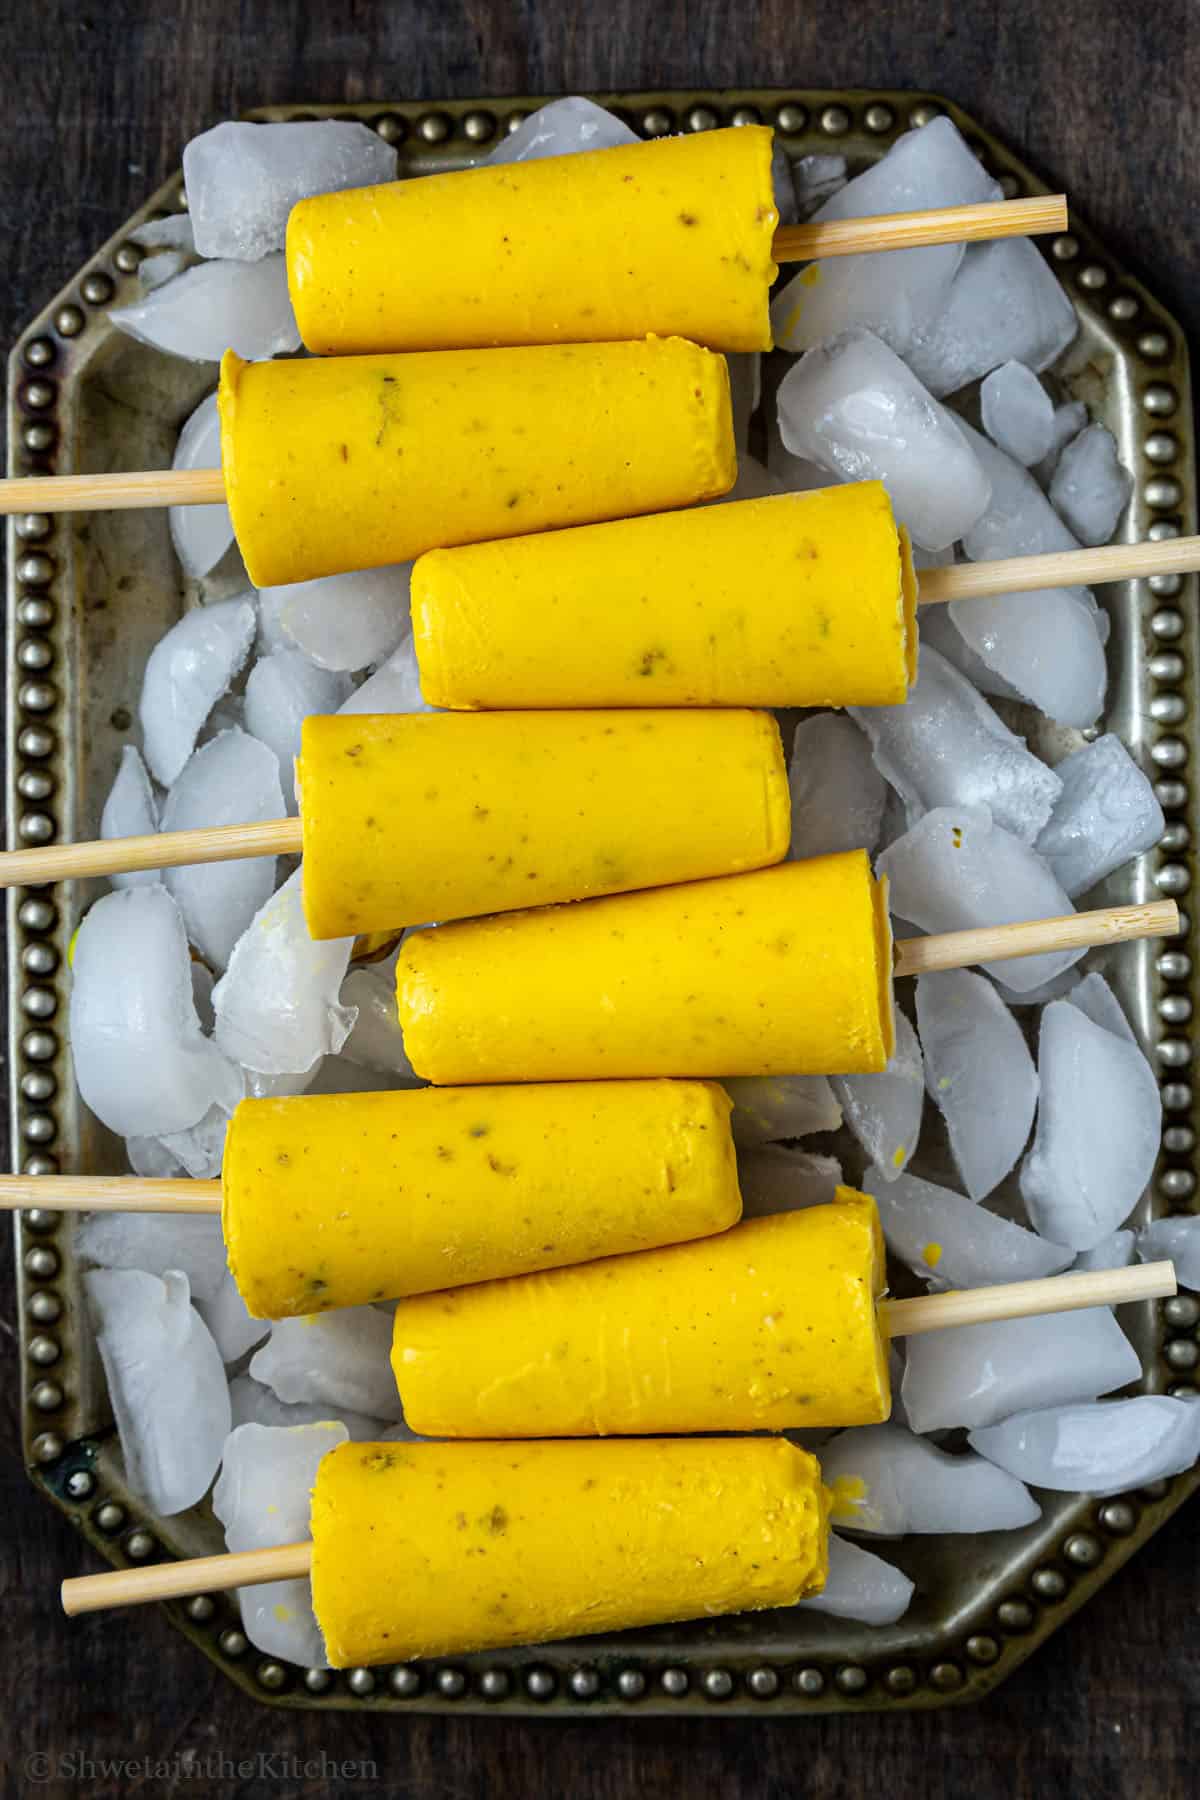 Top view of 8 Kulfi ice creams on an ice filled tray. 